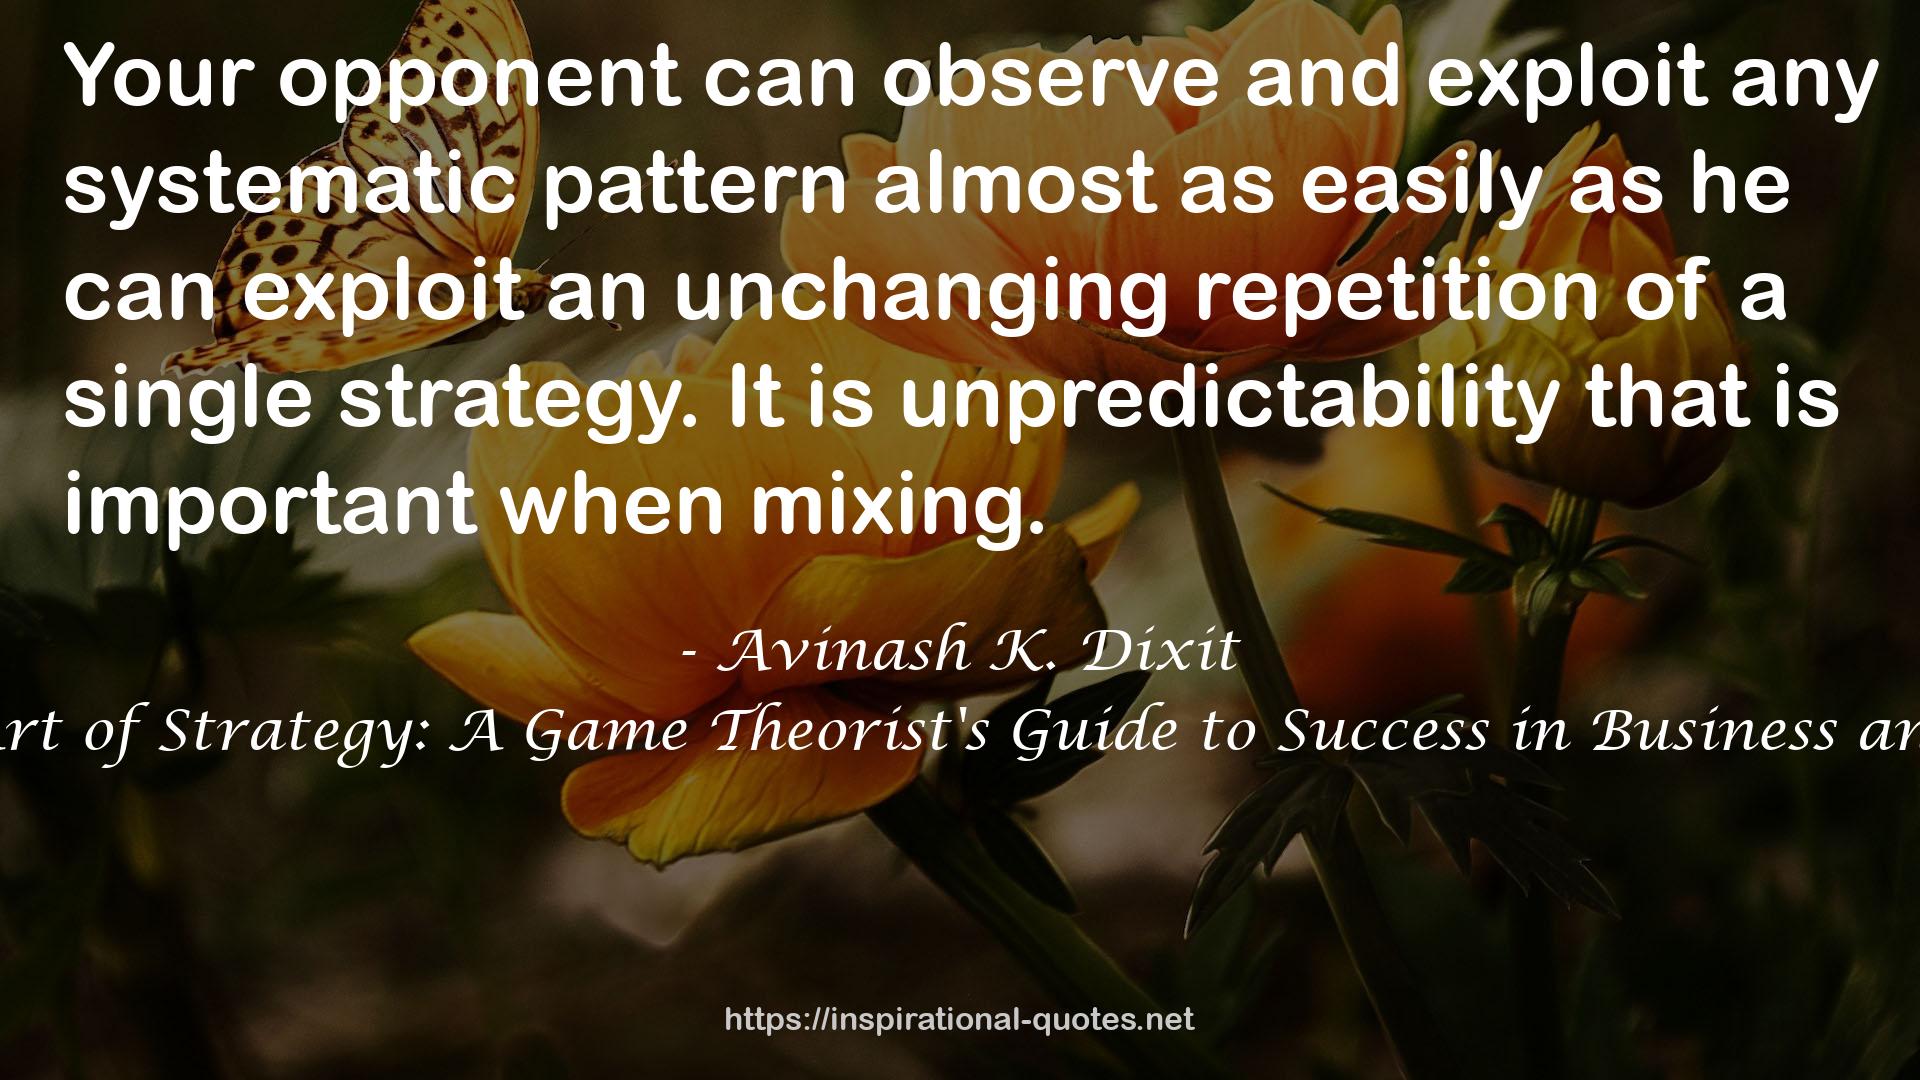 The Art of Strategy: A Game Theorist's Guide to Success in Business and Life QUOTES